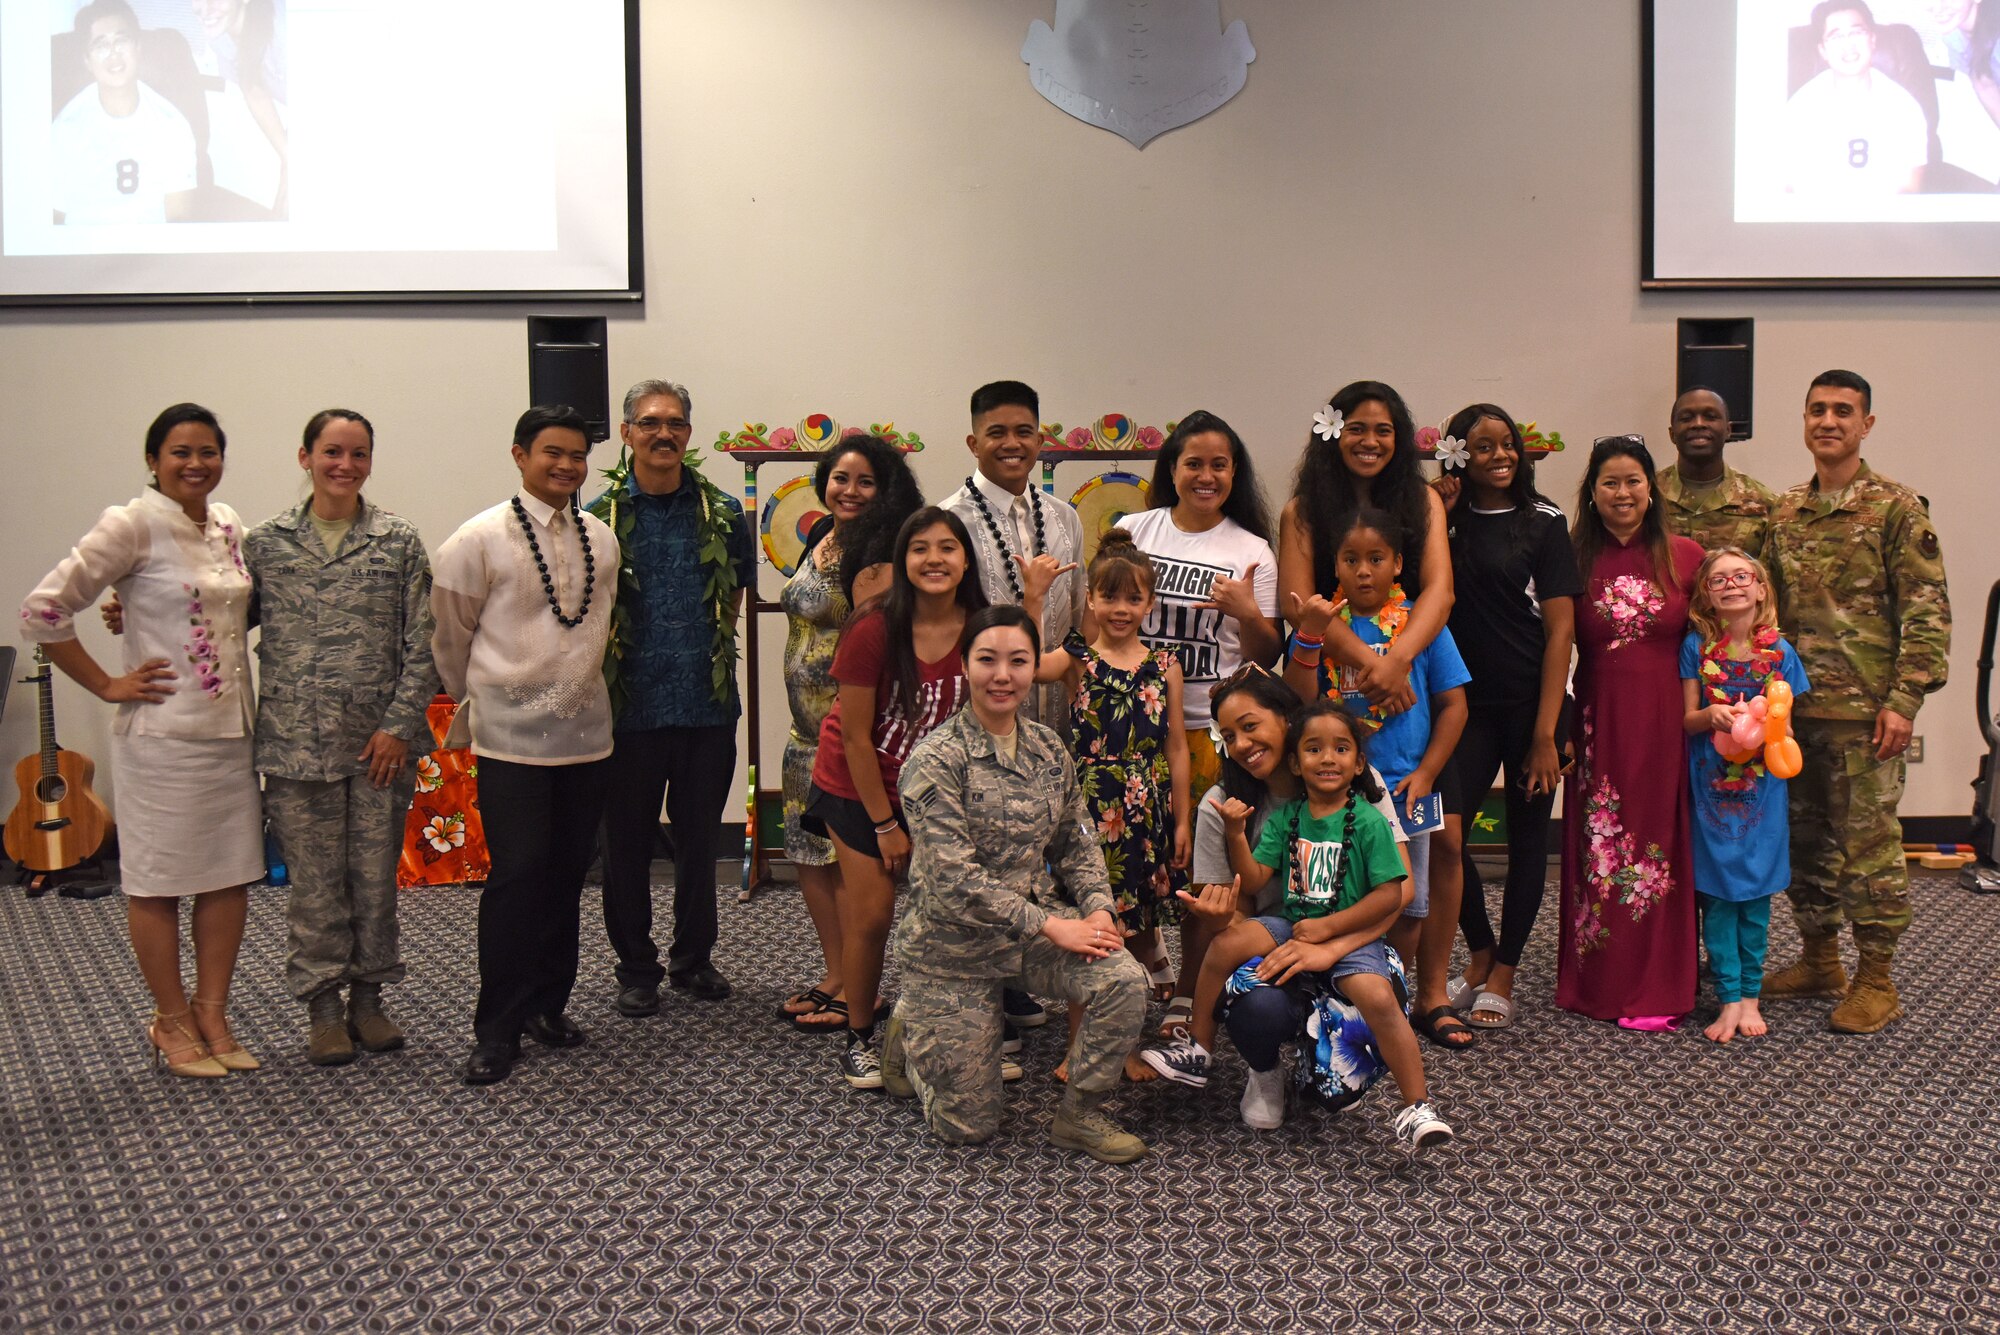 Participants and volunteers for the Asian American Pacific Islander Heritage Month Event take time before clean up for a group photo at the event center on Goodfellow Air Force Base, Texas, May 22, 2019. This was a final event in a series highlighting the service and sacrifices of the Asian Pacific Islanders throughout the United States. (U.S. Air Force photo by Senior Airman Seraiah Hines/Released)